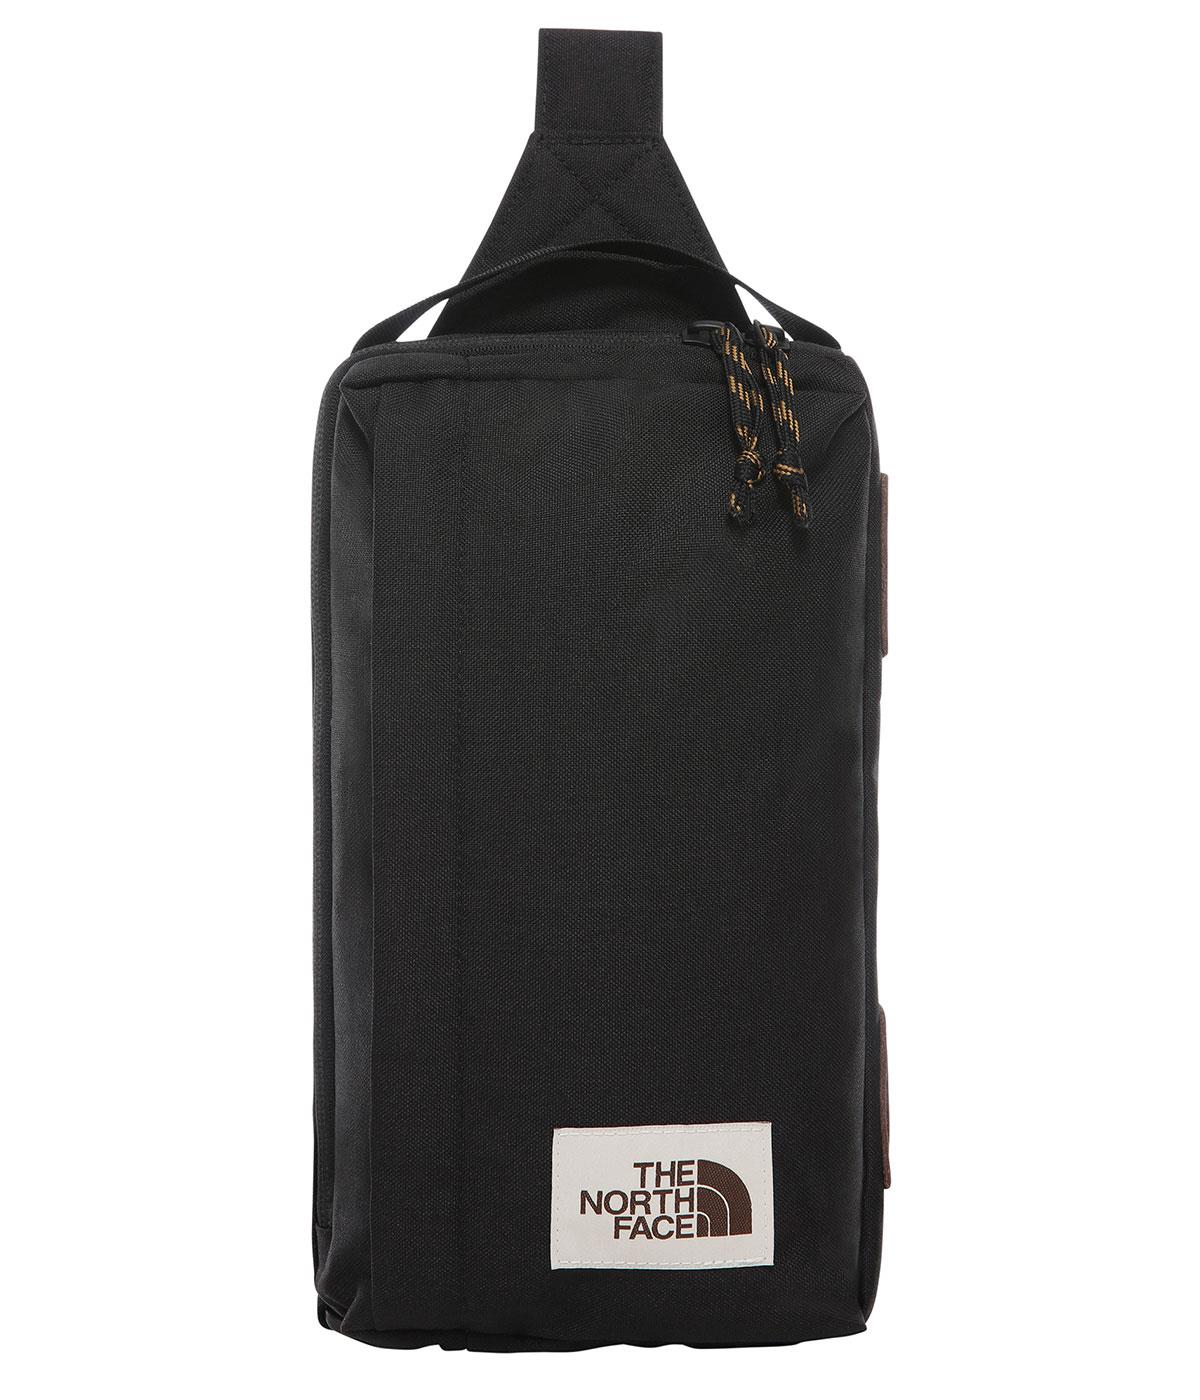 The Northface FIELD BAG NF0A3KZSKS71